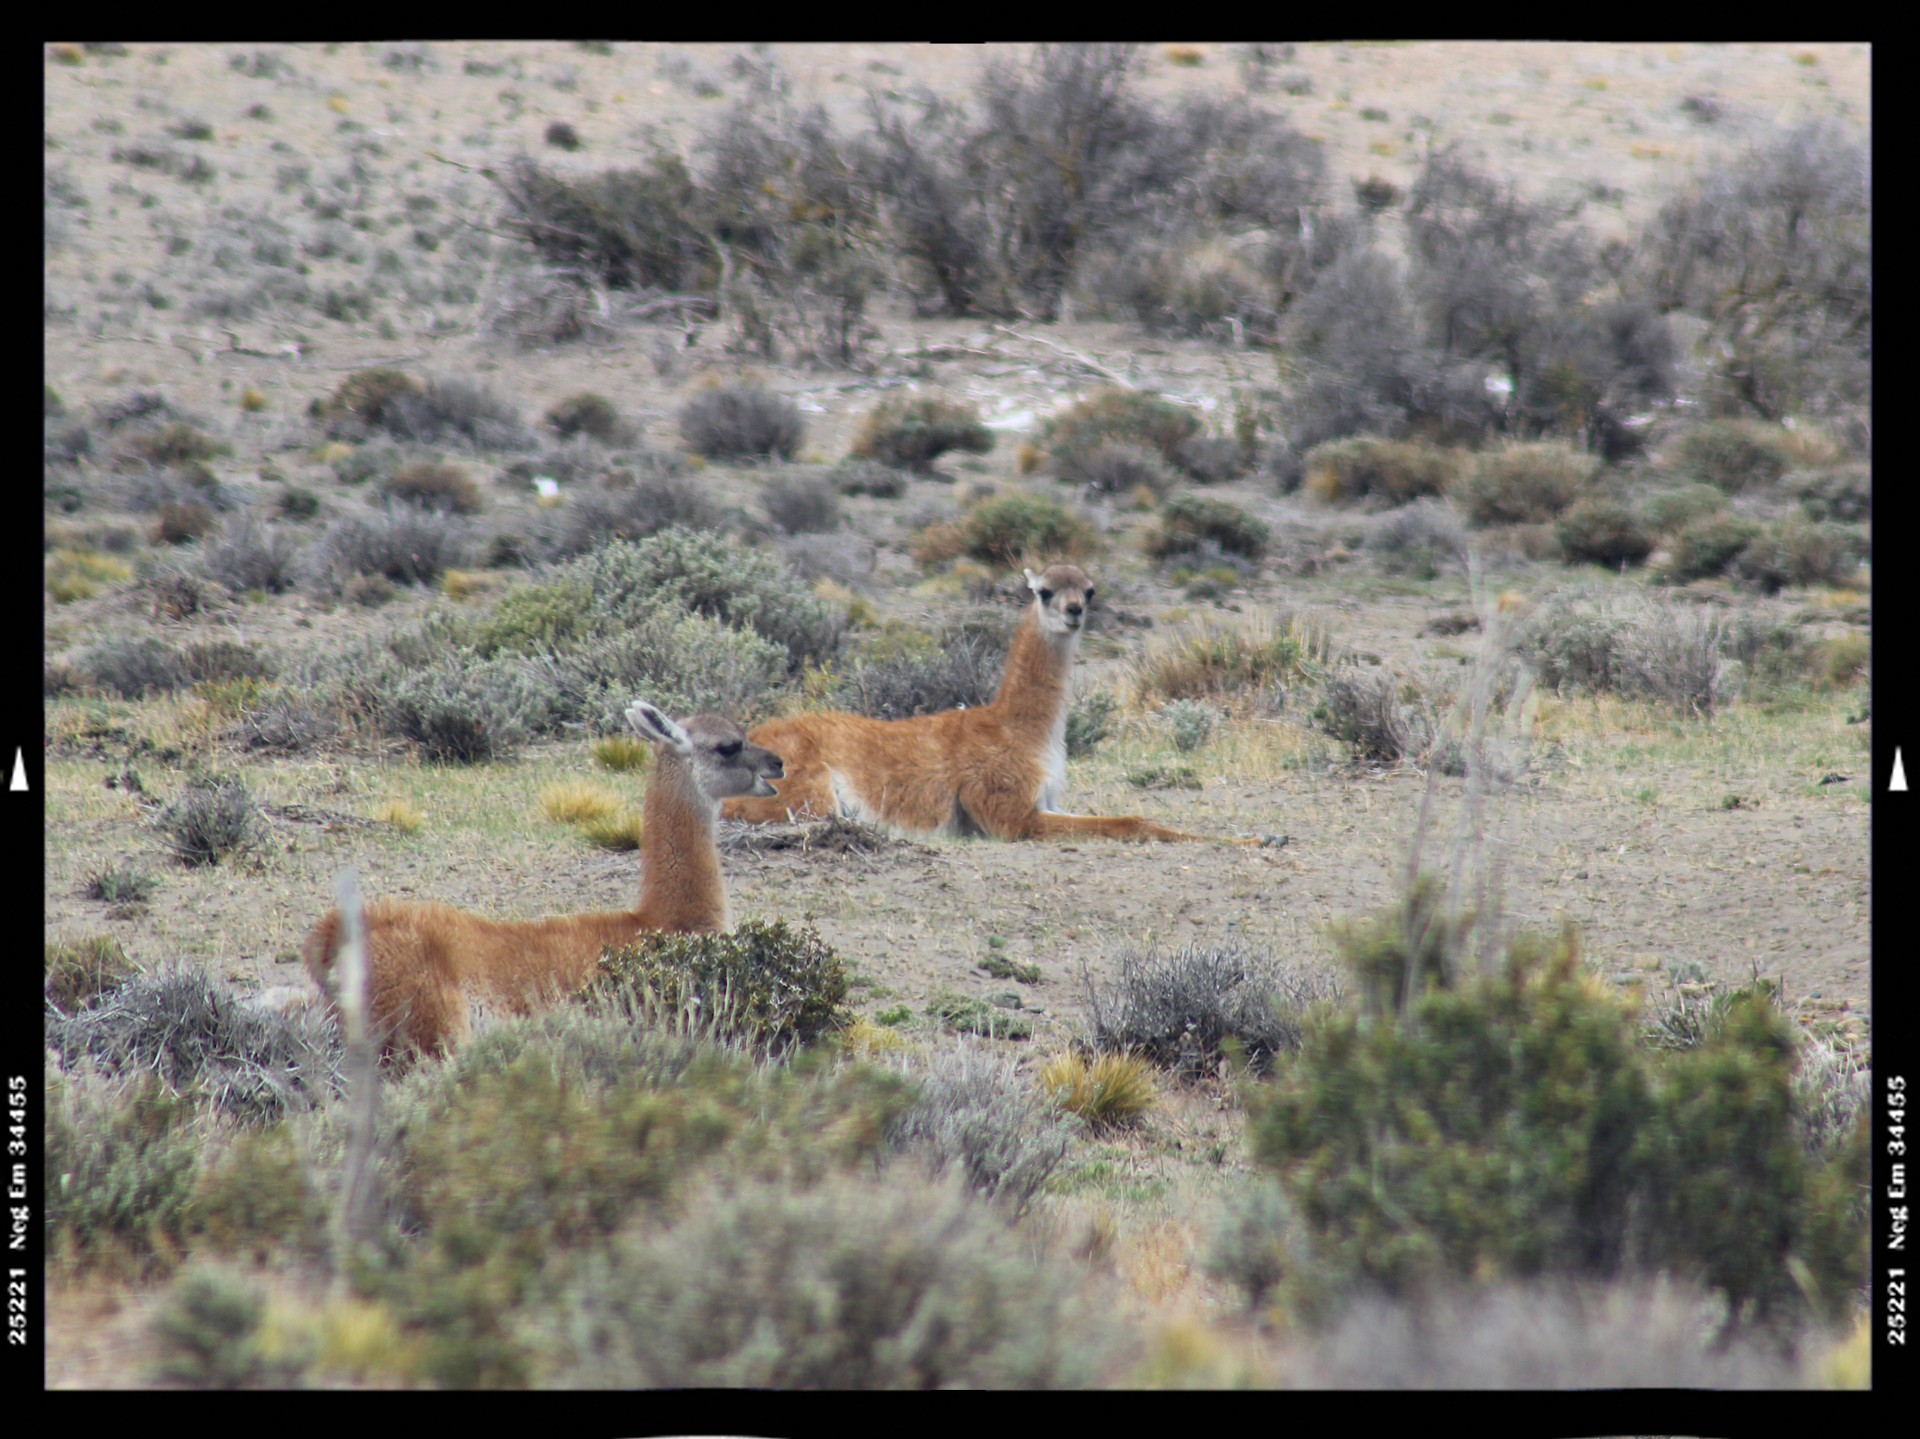 Guanacos in the steppes of Patagonia